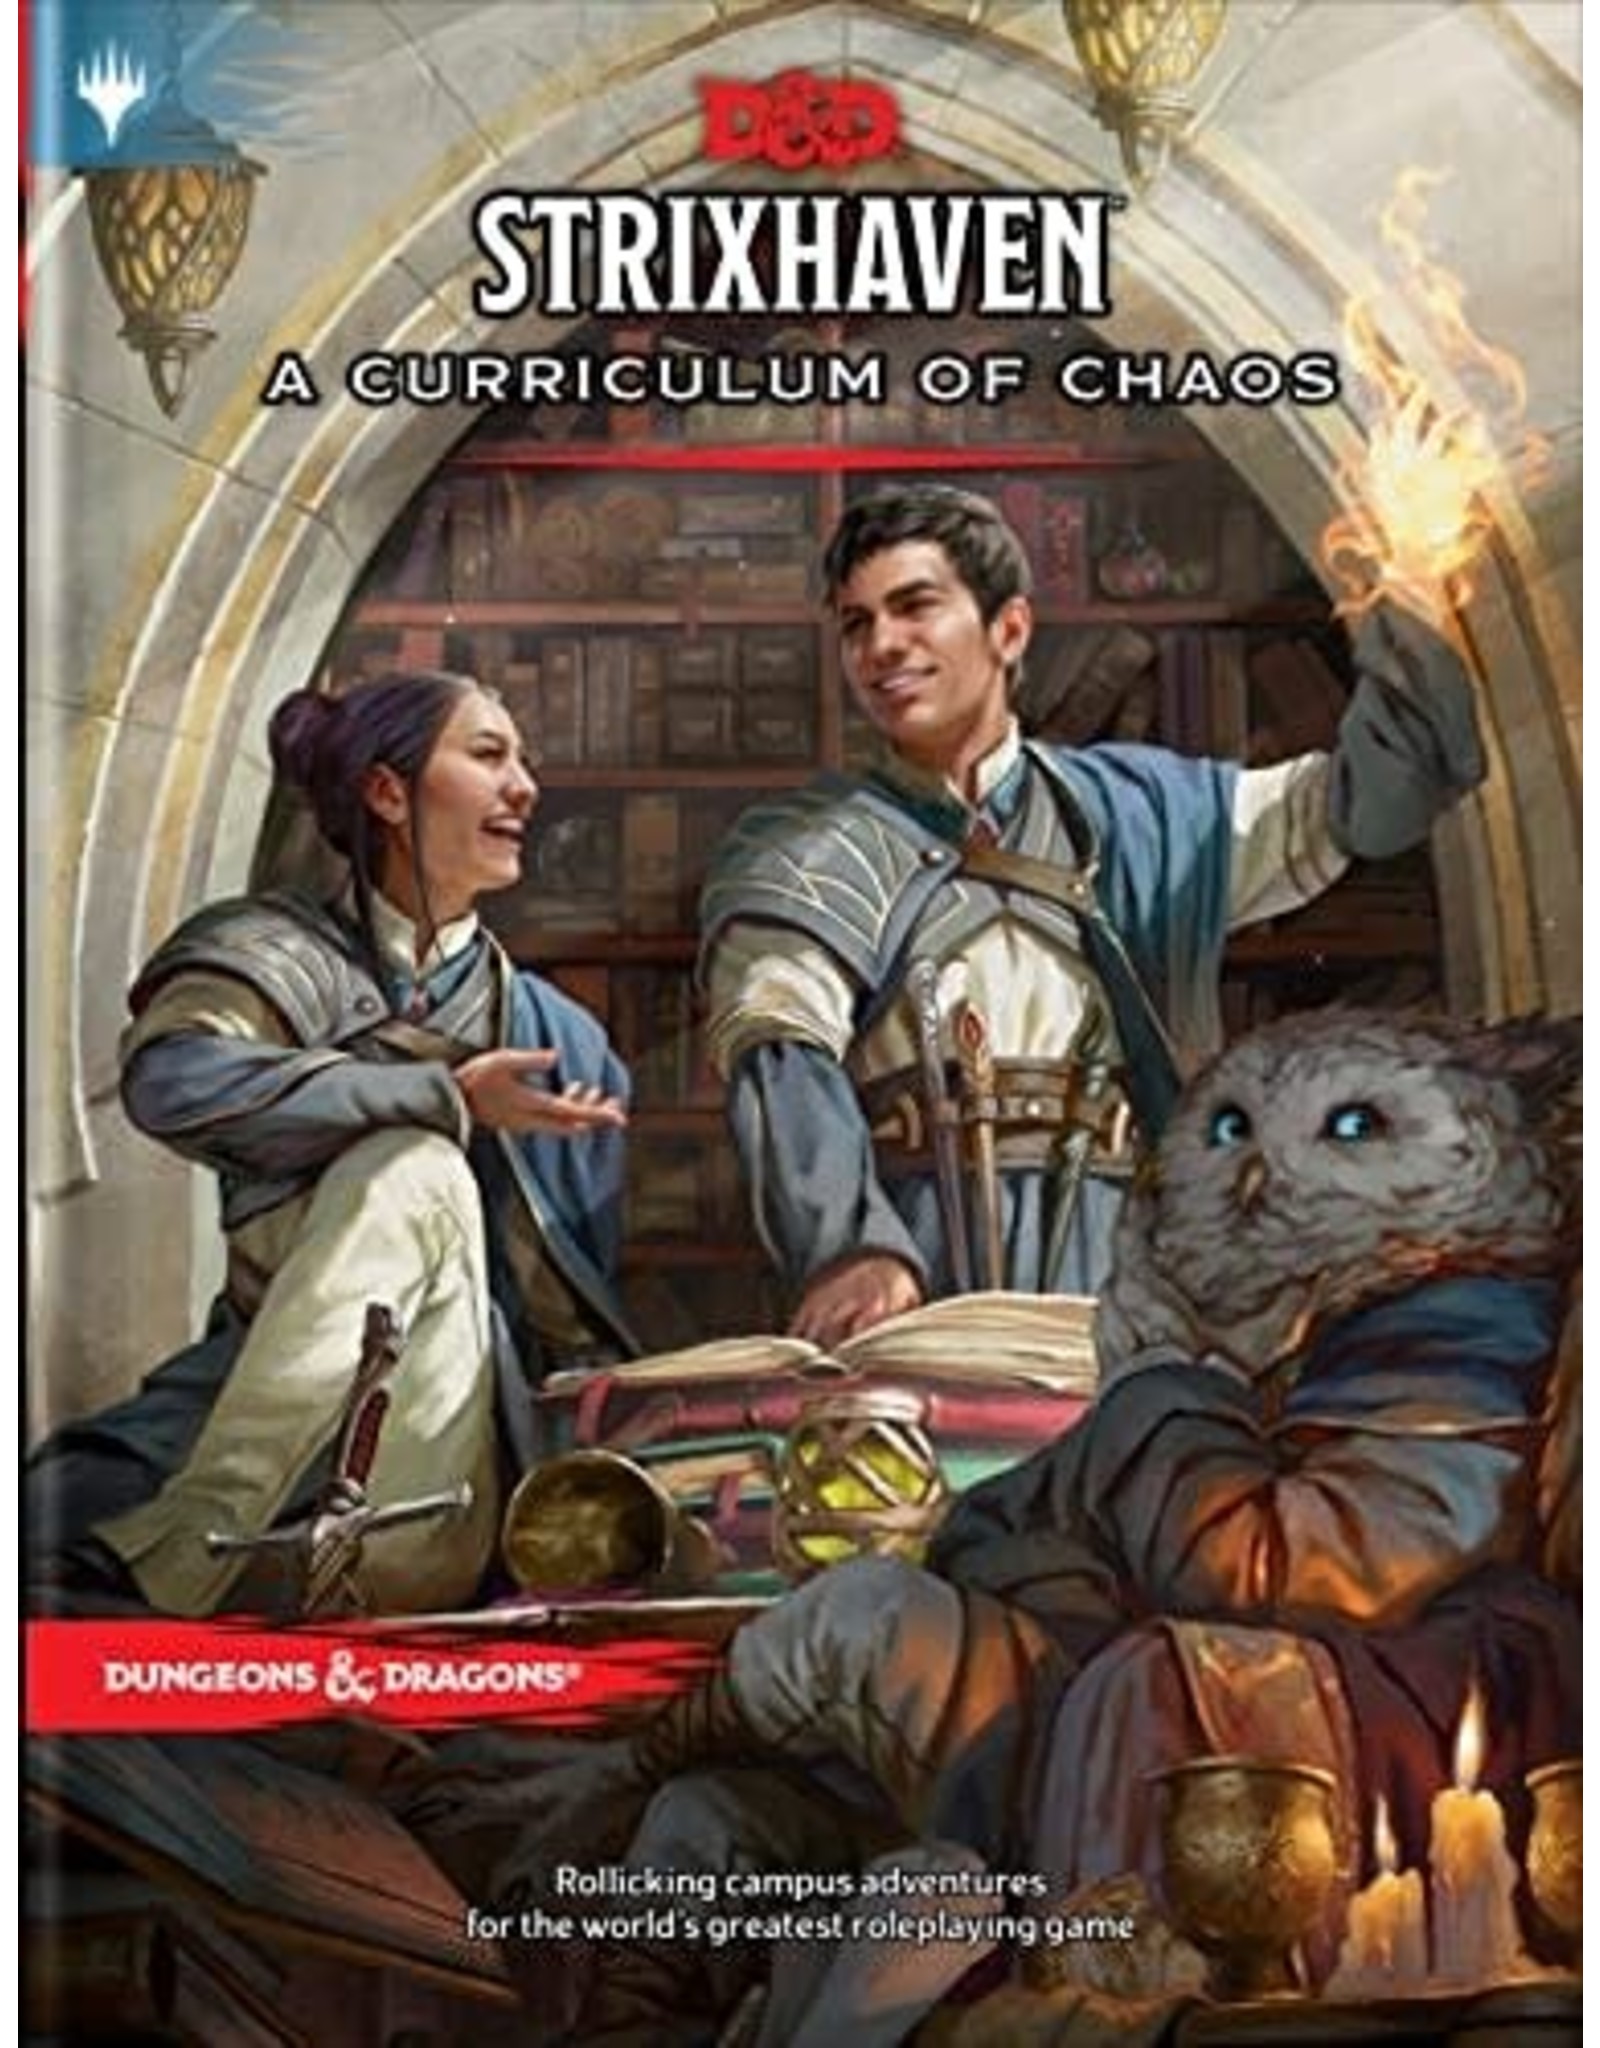 Dungeons & Dragons Dungeons & Dragons - Strixhaven Curriculum of Chaos